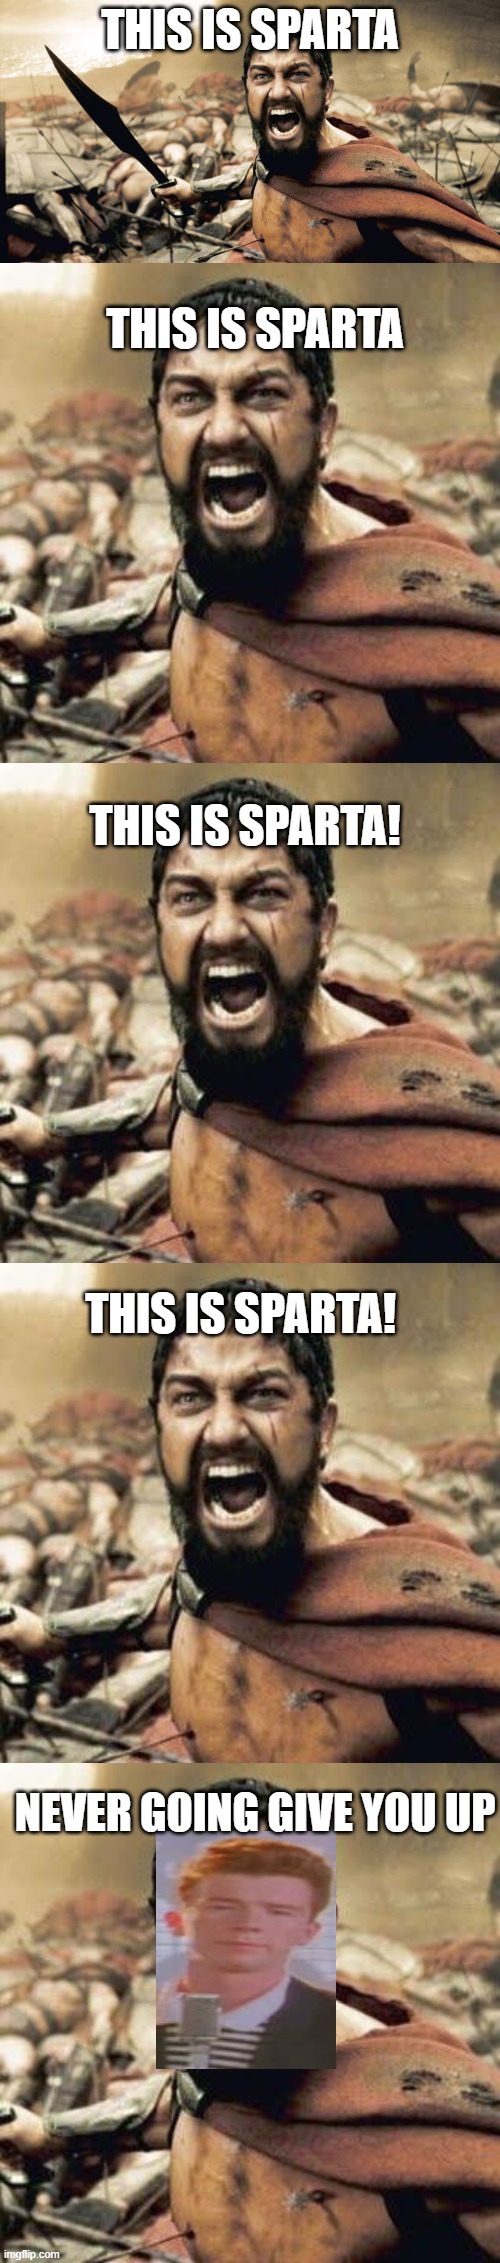 sparta | THIS IS SPARTA; THIS IS SPARTA; THIS IS SPARTA! THIS IS SPARTA! NEVER GOING GIVE YOU UP | image tagged in memes,sparta leonidas,this is sparta,funny memes | made w/ Imgflip meme maker